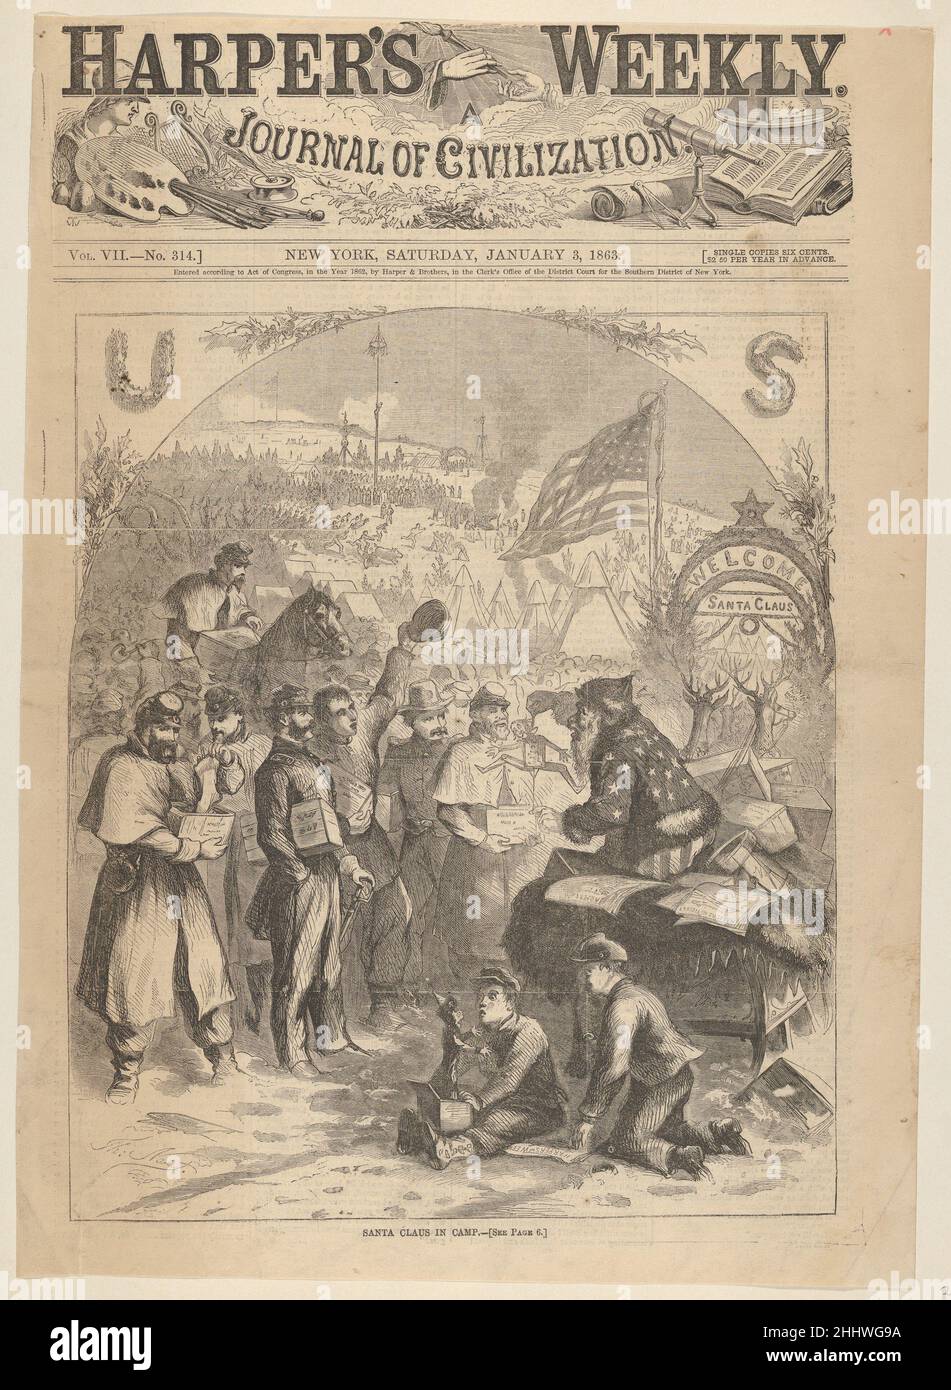 Santa Claus in Camp (from 'Harper's Weekly') January 3, 1863 Thomas Nast American, born Germany Nast's image was published in the 1862 Christmas issue of Harper’s Weekly, during days filled with both trials for the Union and rising hope. Santa Claus has arrived by sleigh in a Union army camp to distribute gifts. This was the moment that Nast conceived and introduced our modern image of Santa Claus. Combining European traditions of St. Nicholas with folk images of elves from his native Germany, he created the jolly gift-giver now associated with Christmas that here offers cheer to soldiers far Stock Photo